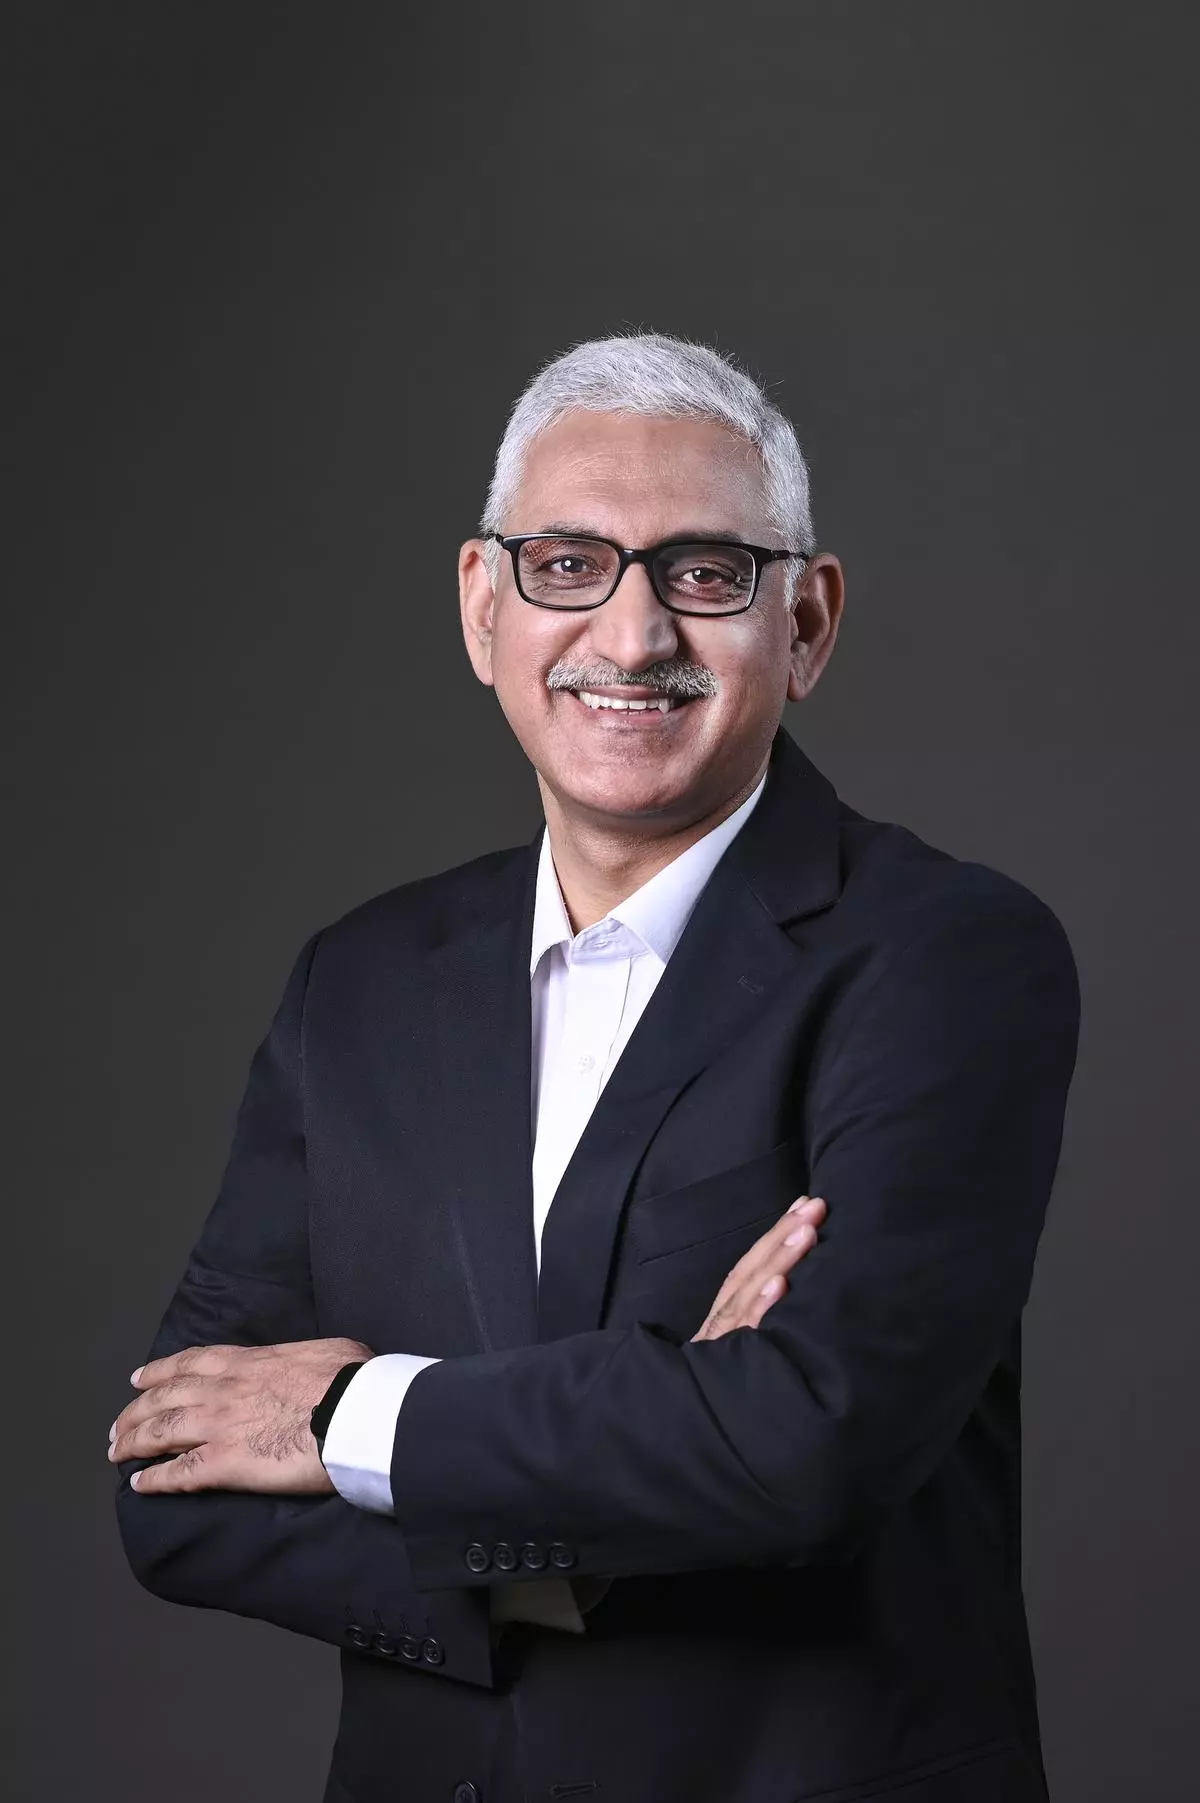 Rajesh Awasthi, VP, Cloud, Hosting and managed services, Tata Communications